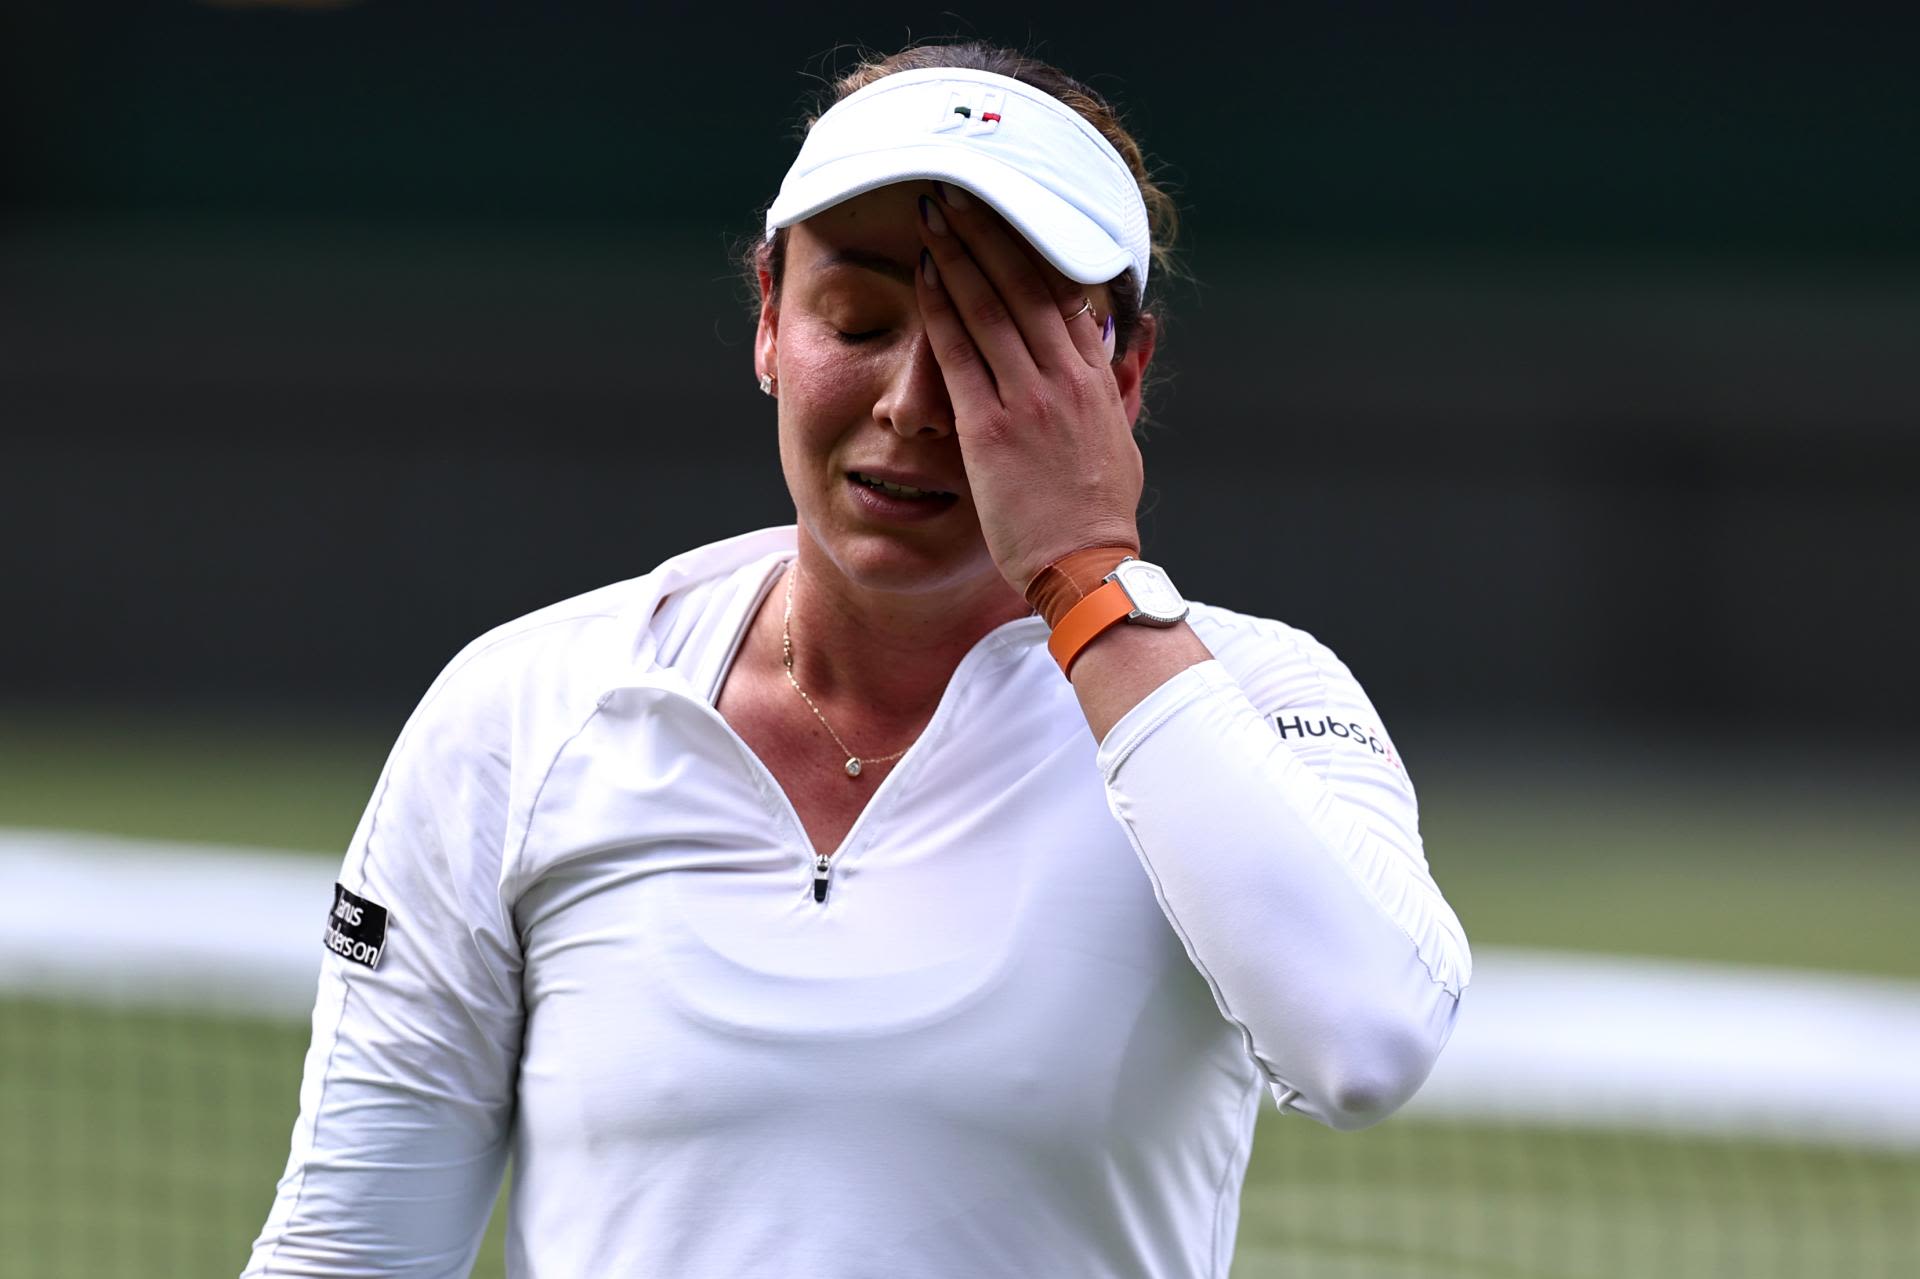 Donna Vekic makes extremely painful comment after devastating Wimbledon loss